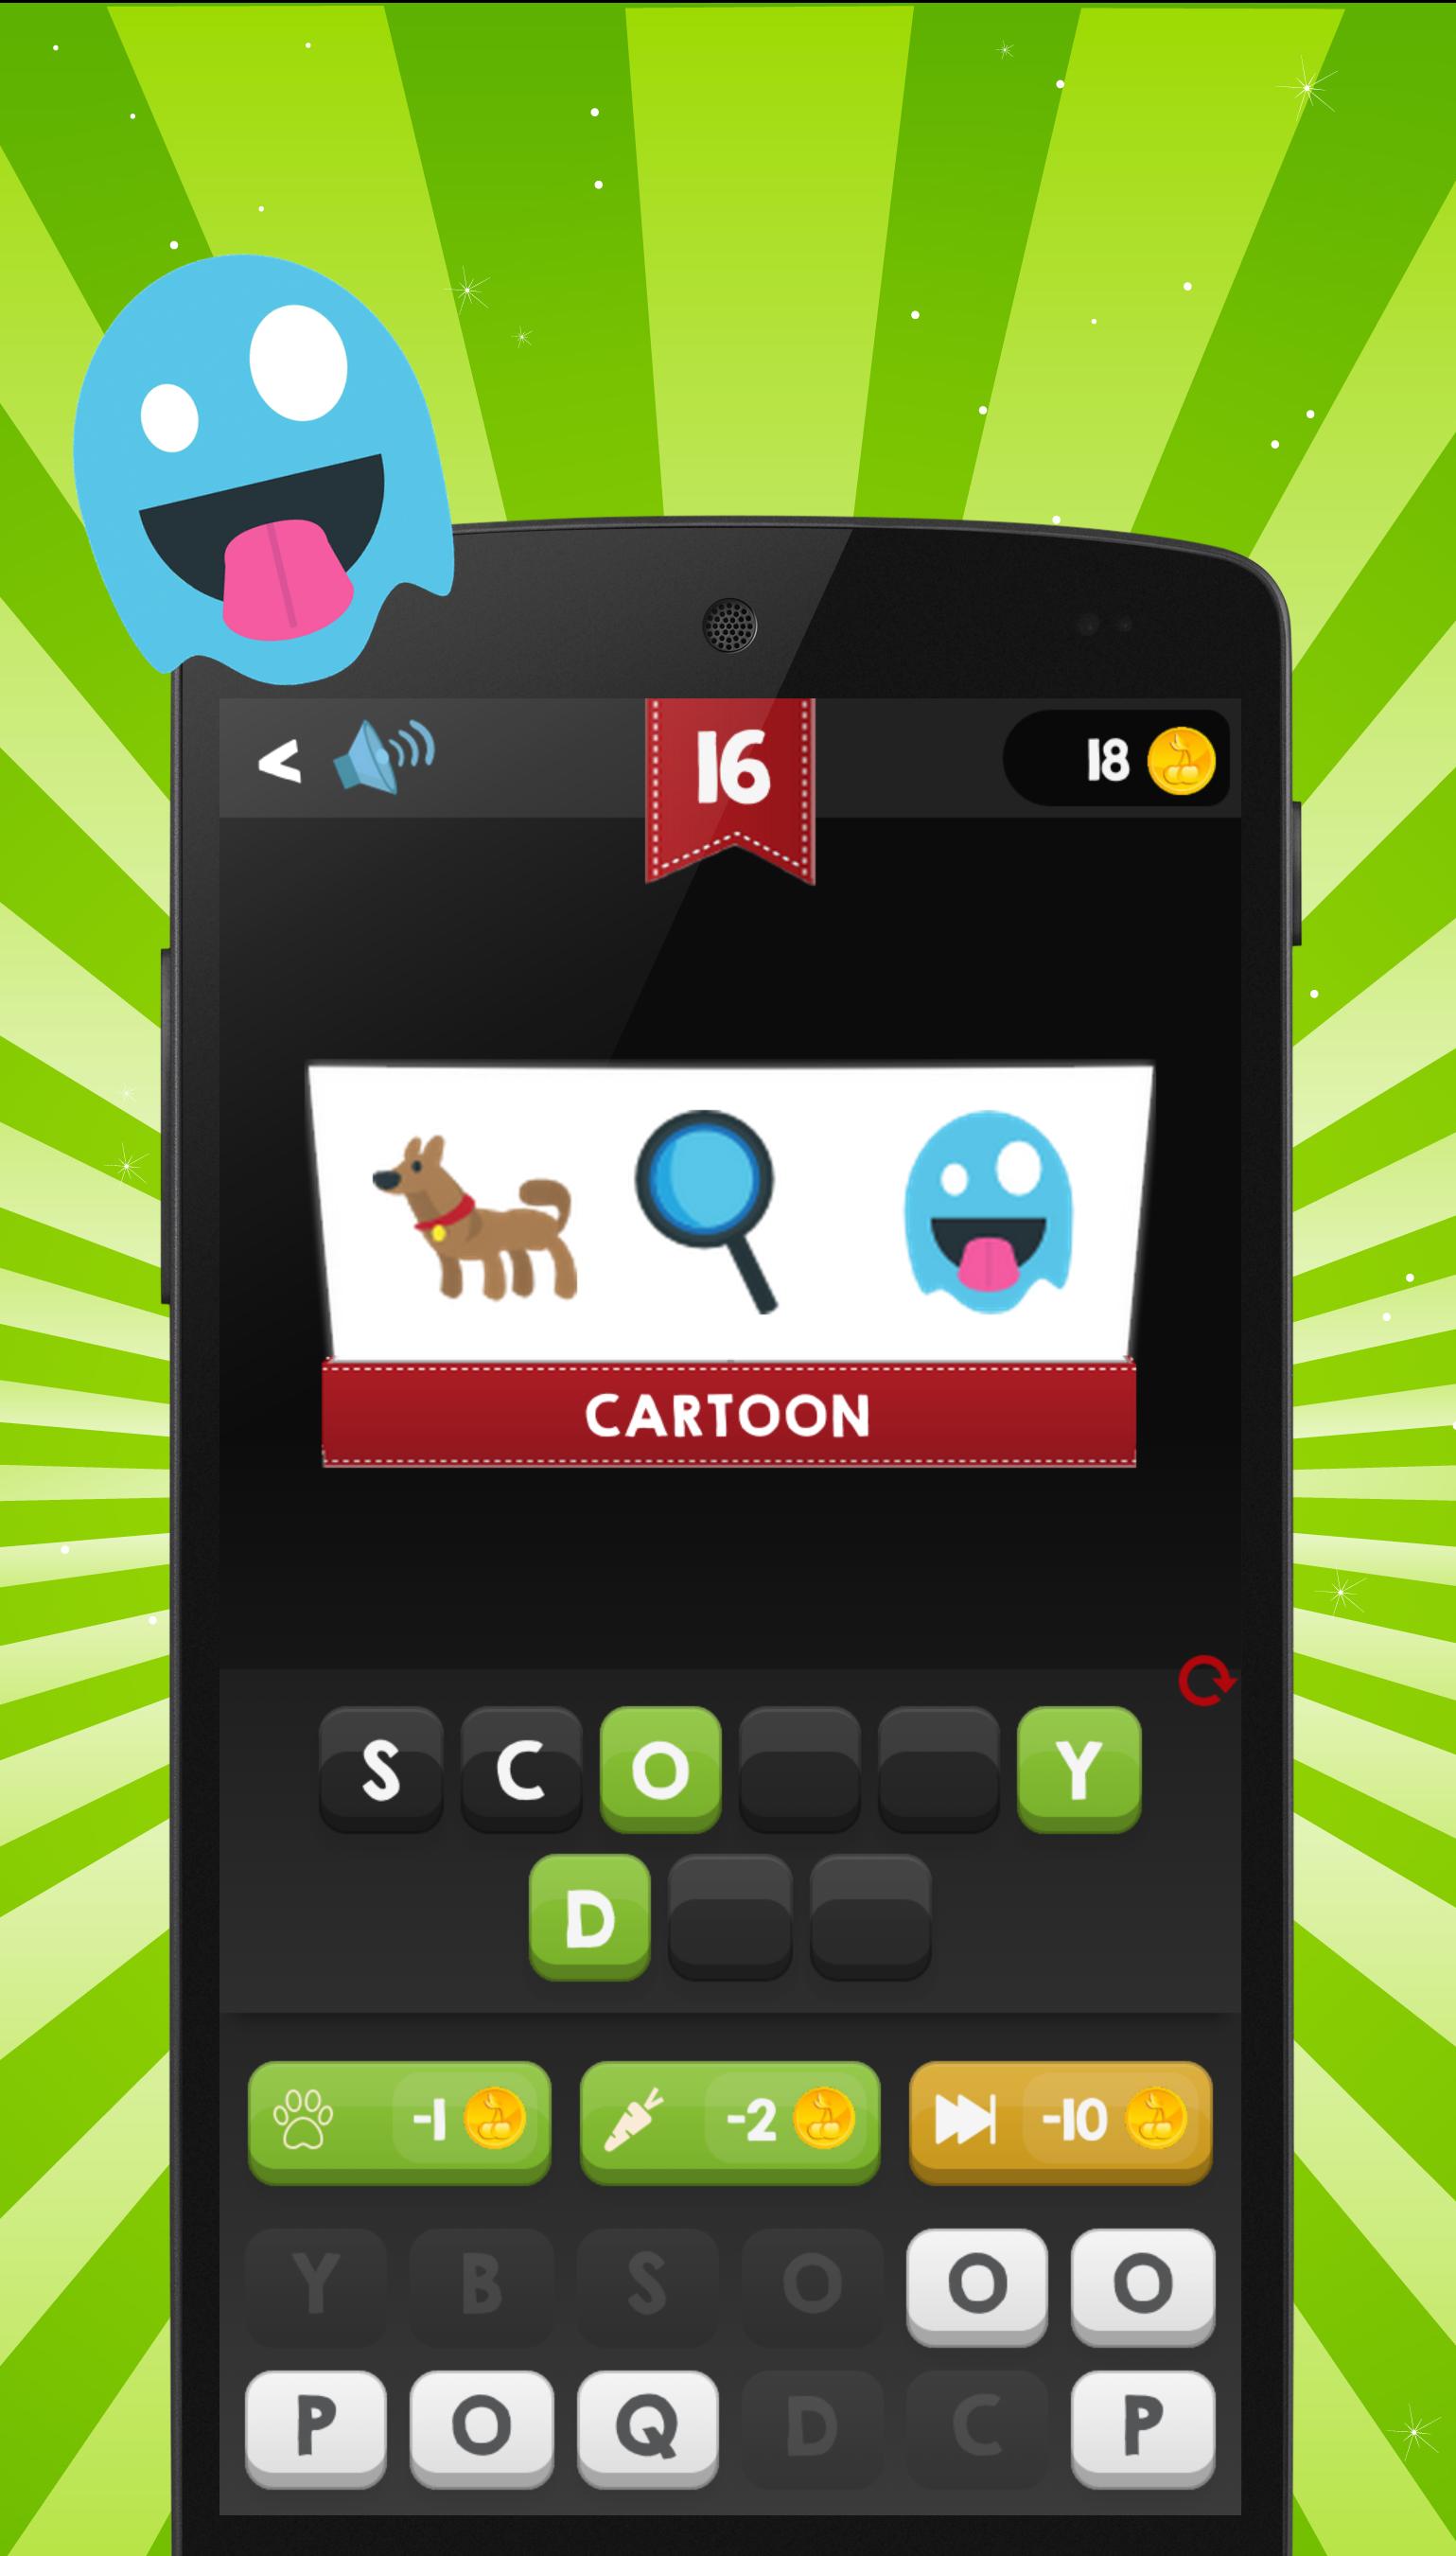 Emoji Guess What Is Emoji For Android Apk Download